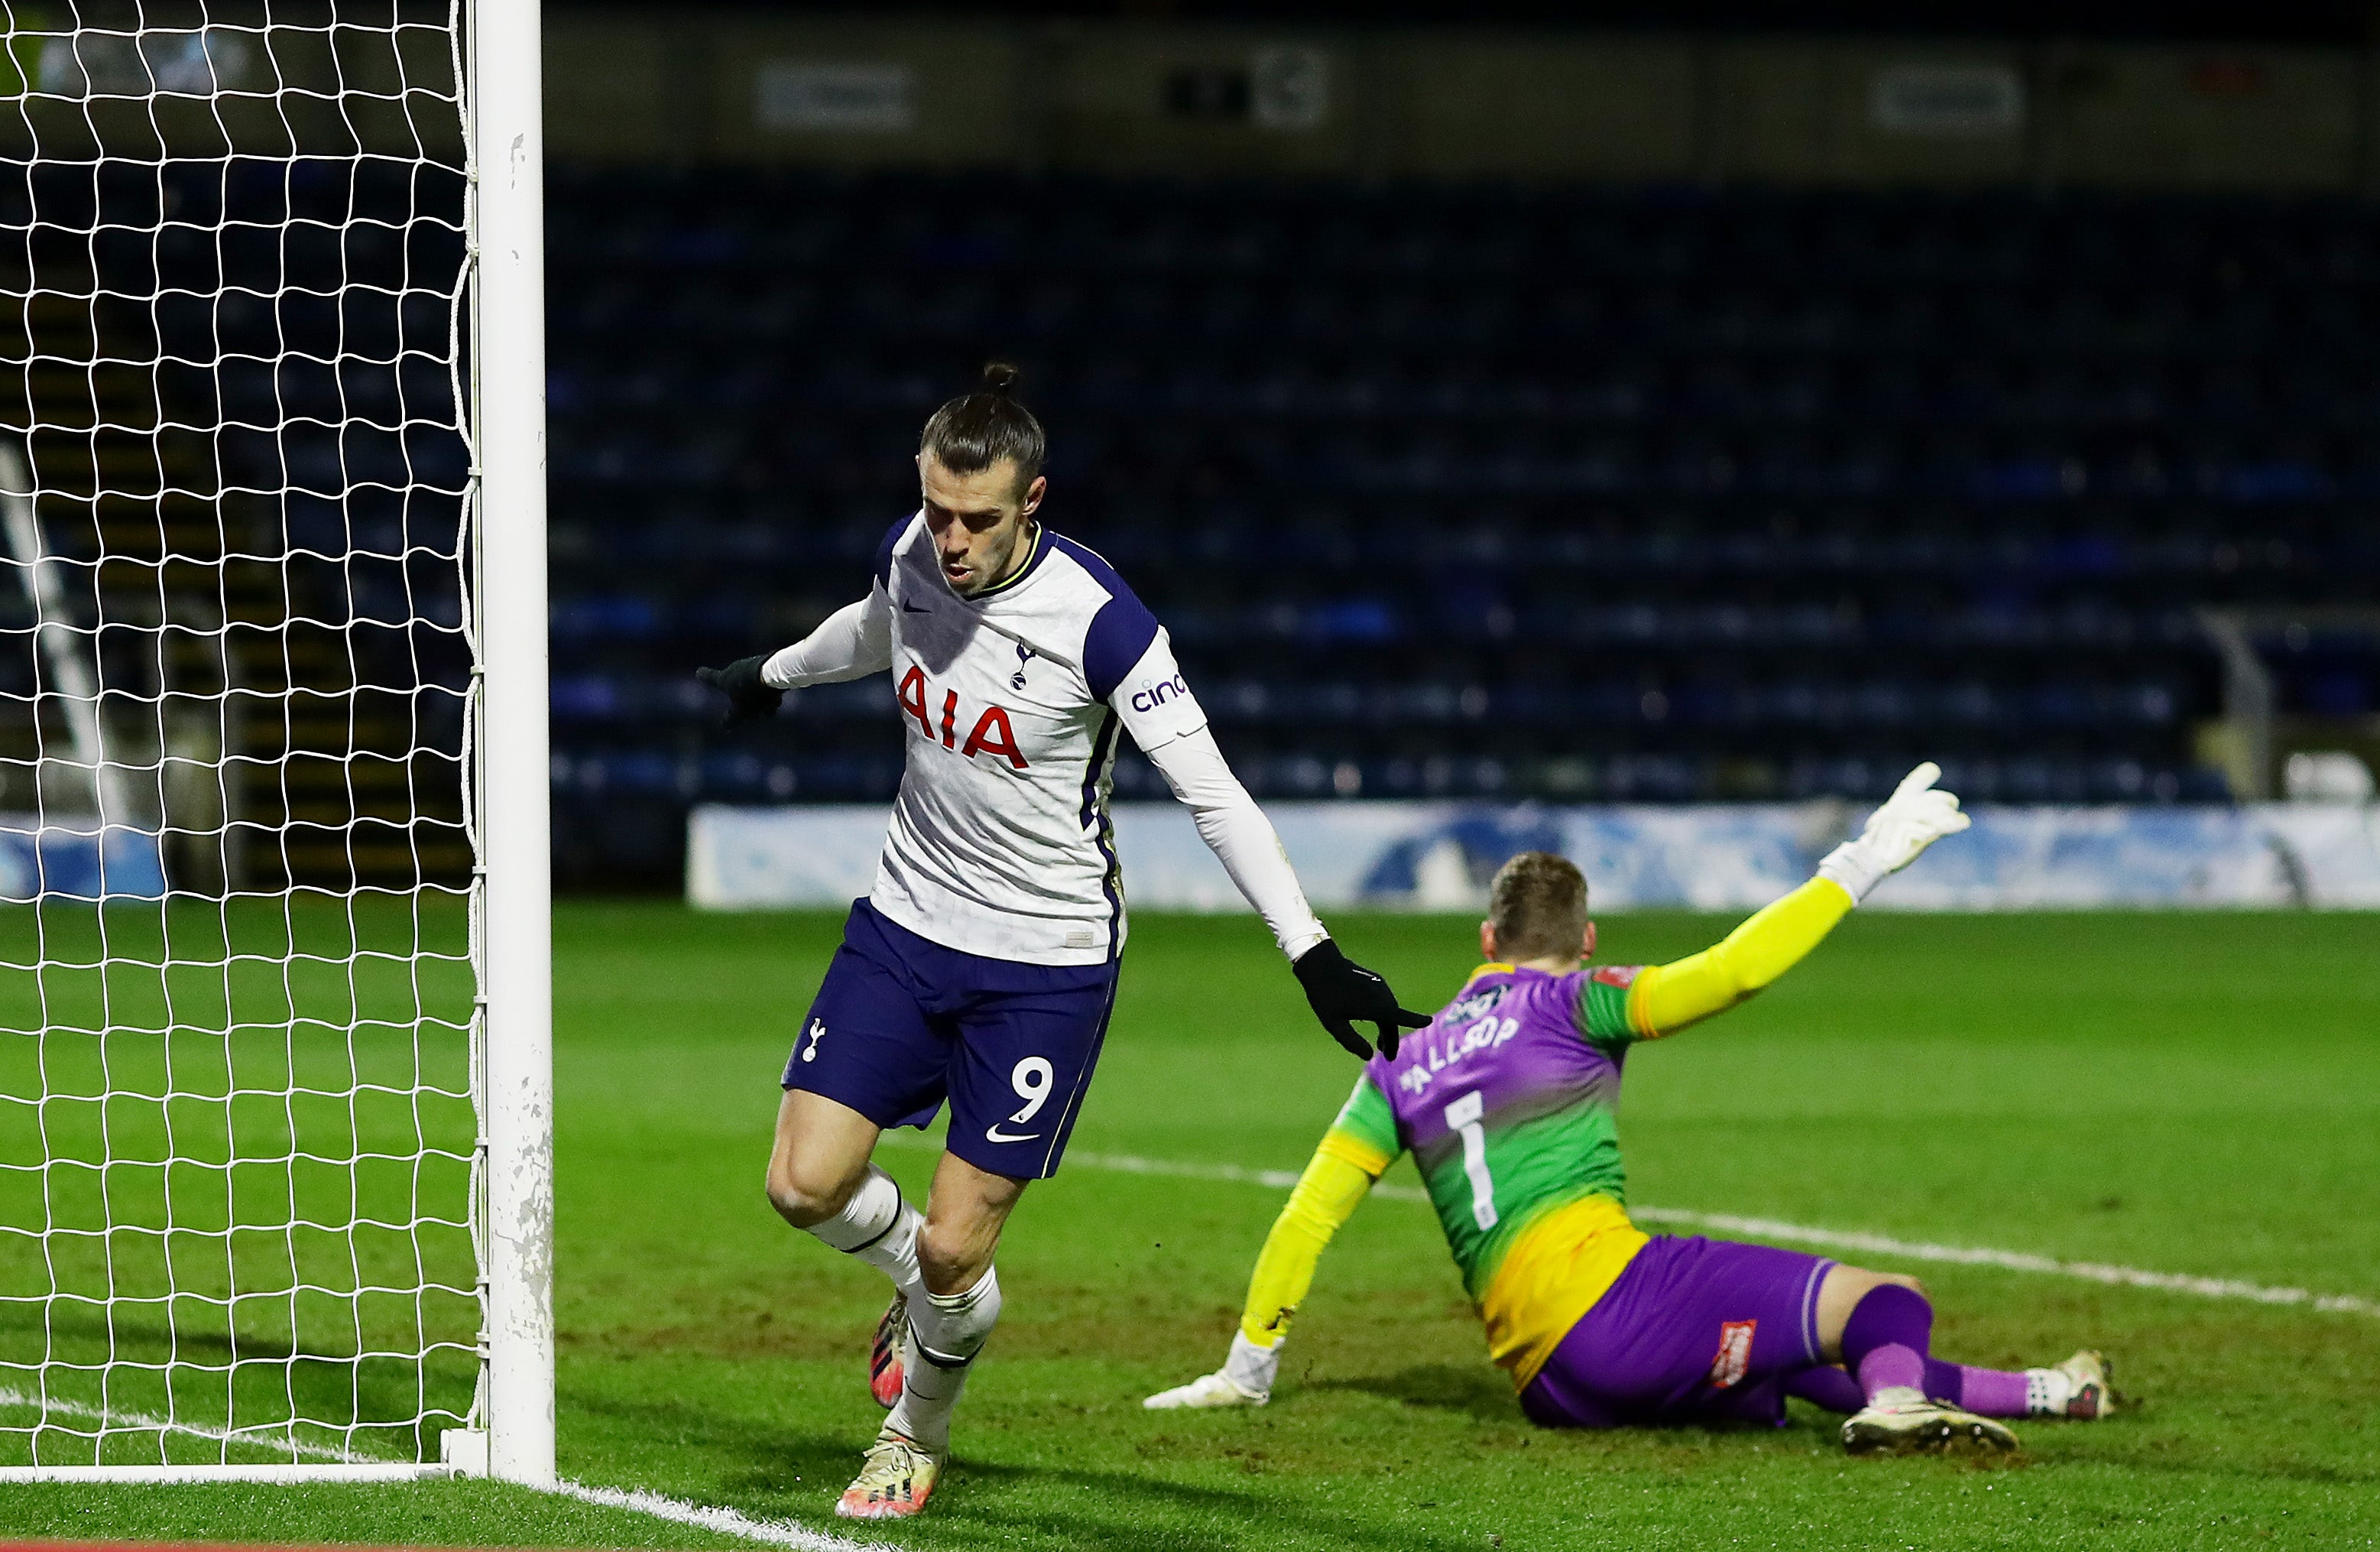 Bale netted the equaliser against Wycombe